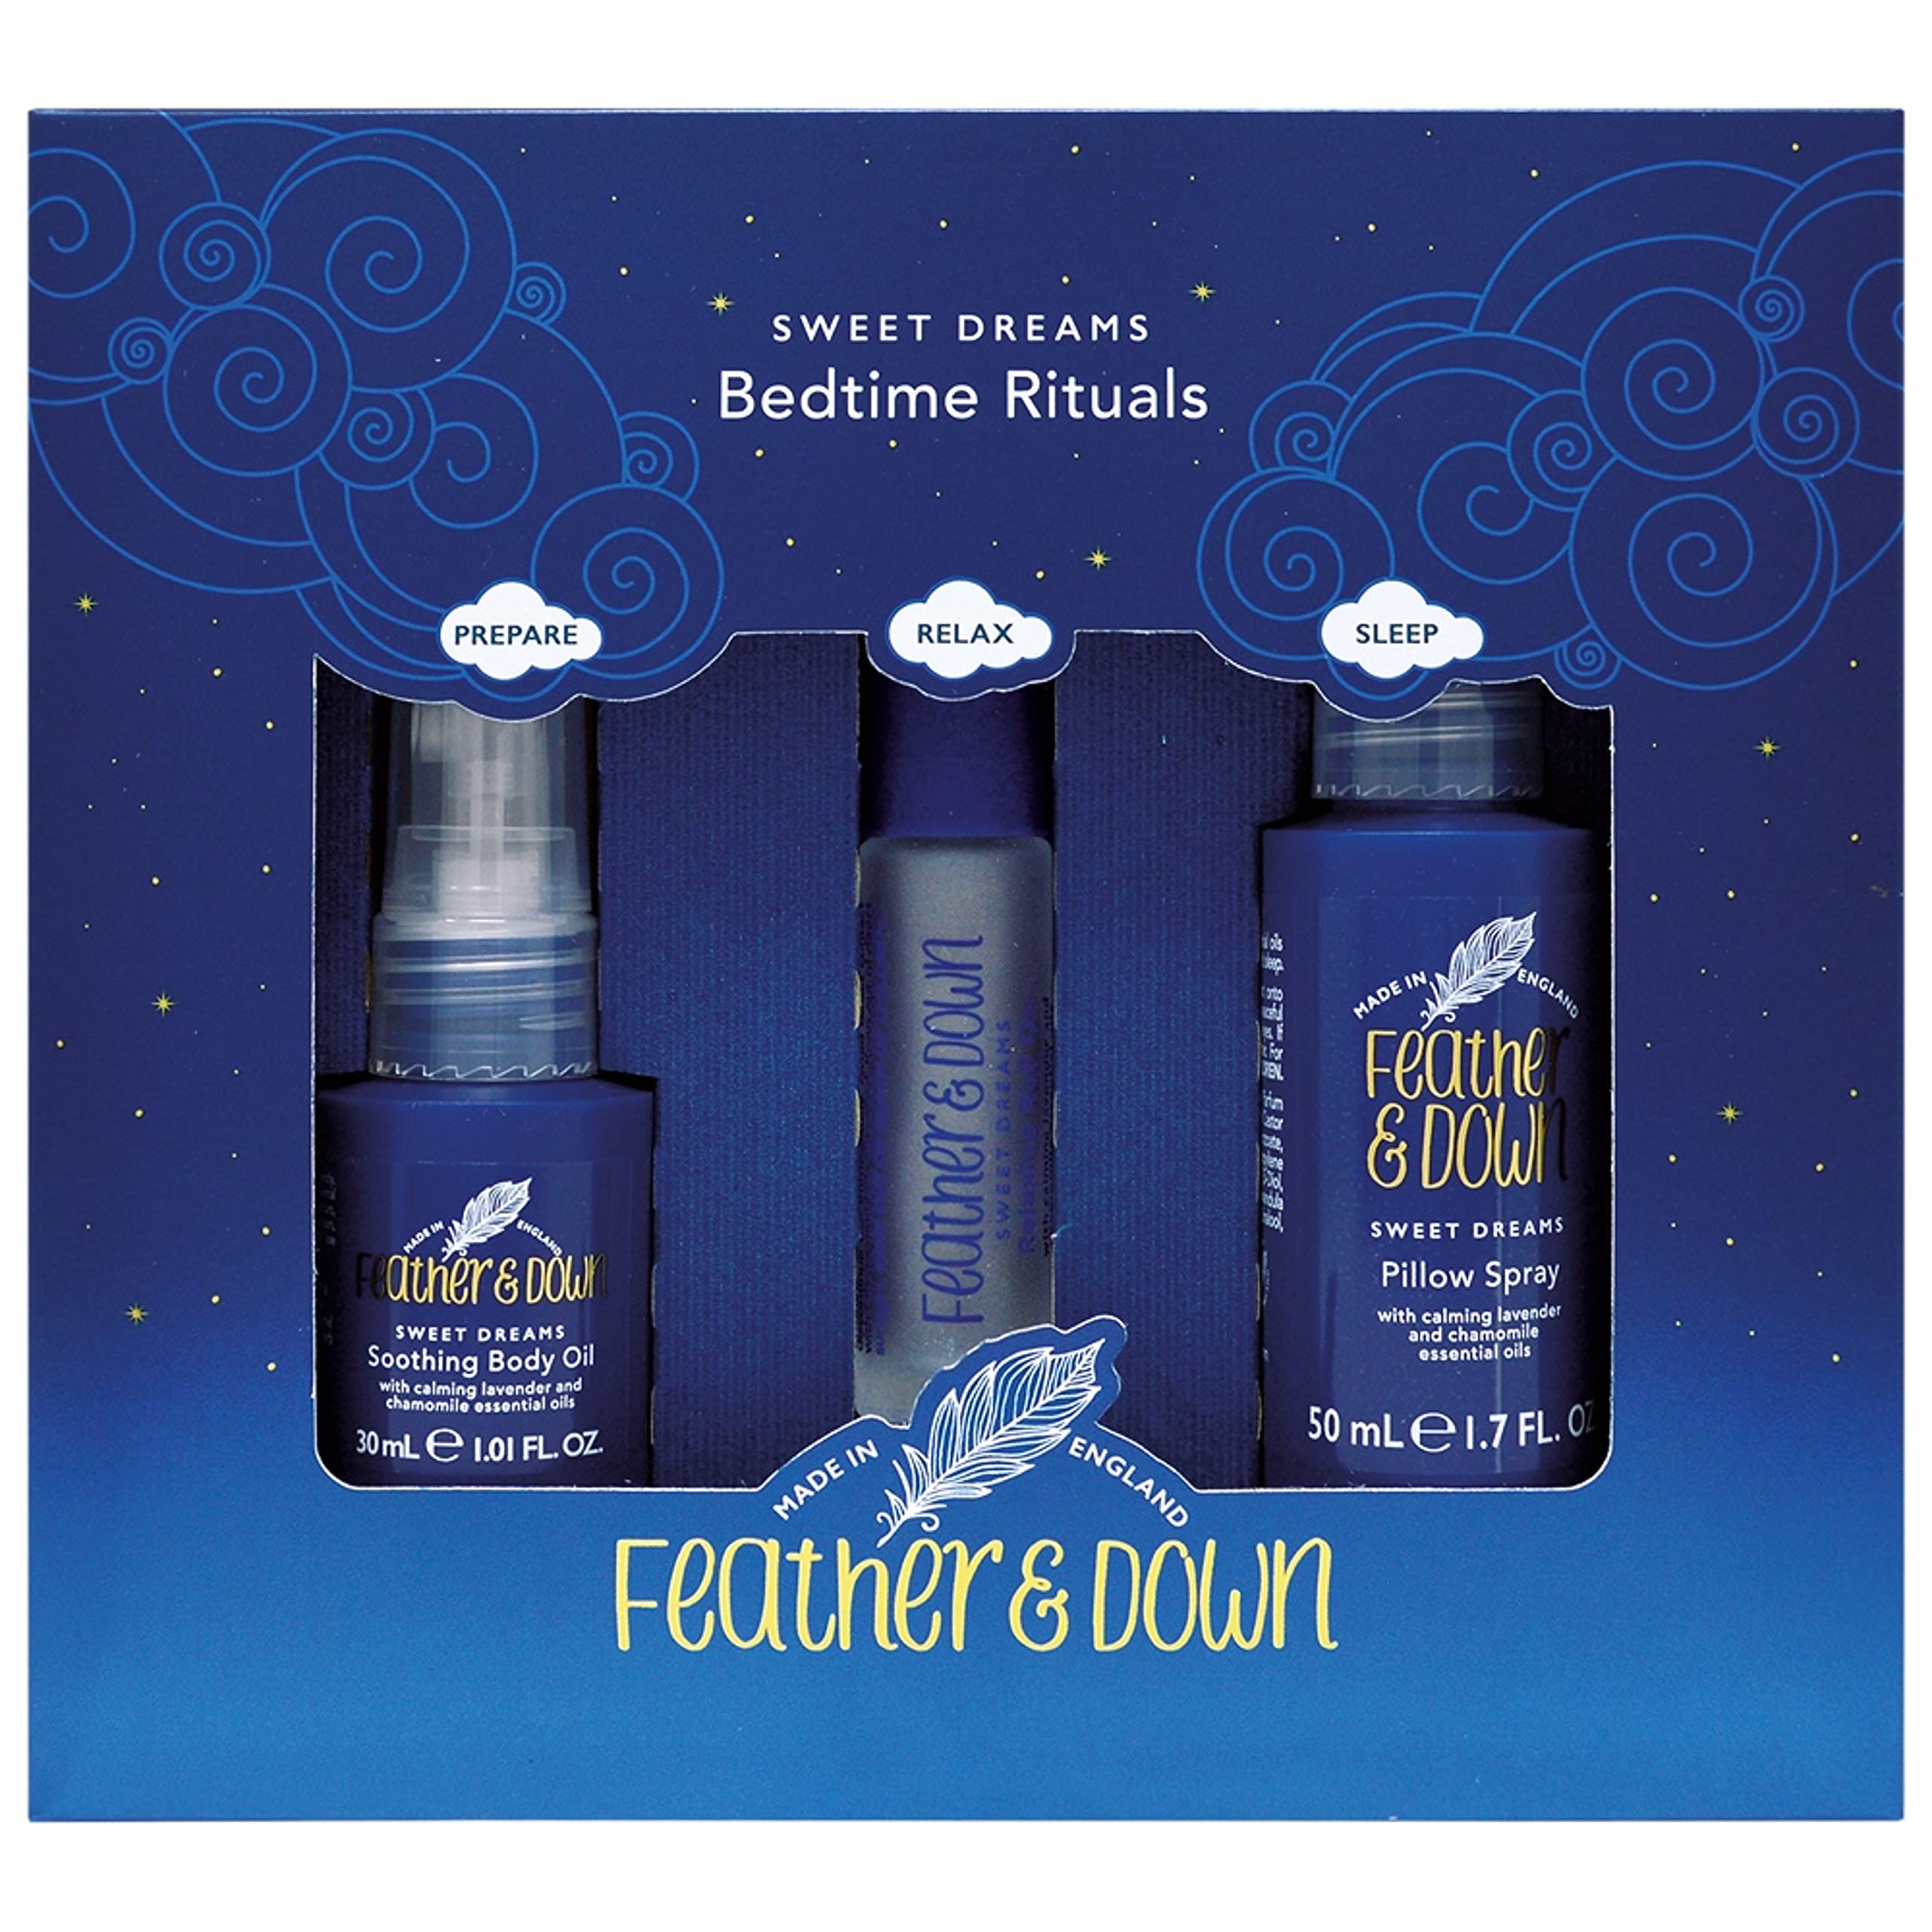 Feather & Down Sweet Dream Bedtime Rituals Gift Set (Includes 30ml Soothing body Oil, 50ml Pillow Spray & 10ml Relaxing Rollerball) - Create the perfect bedtime regime